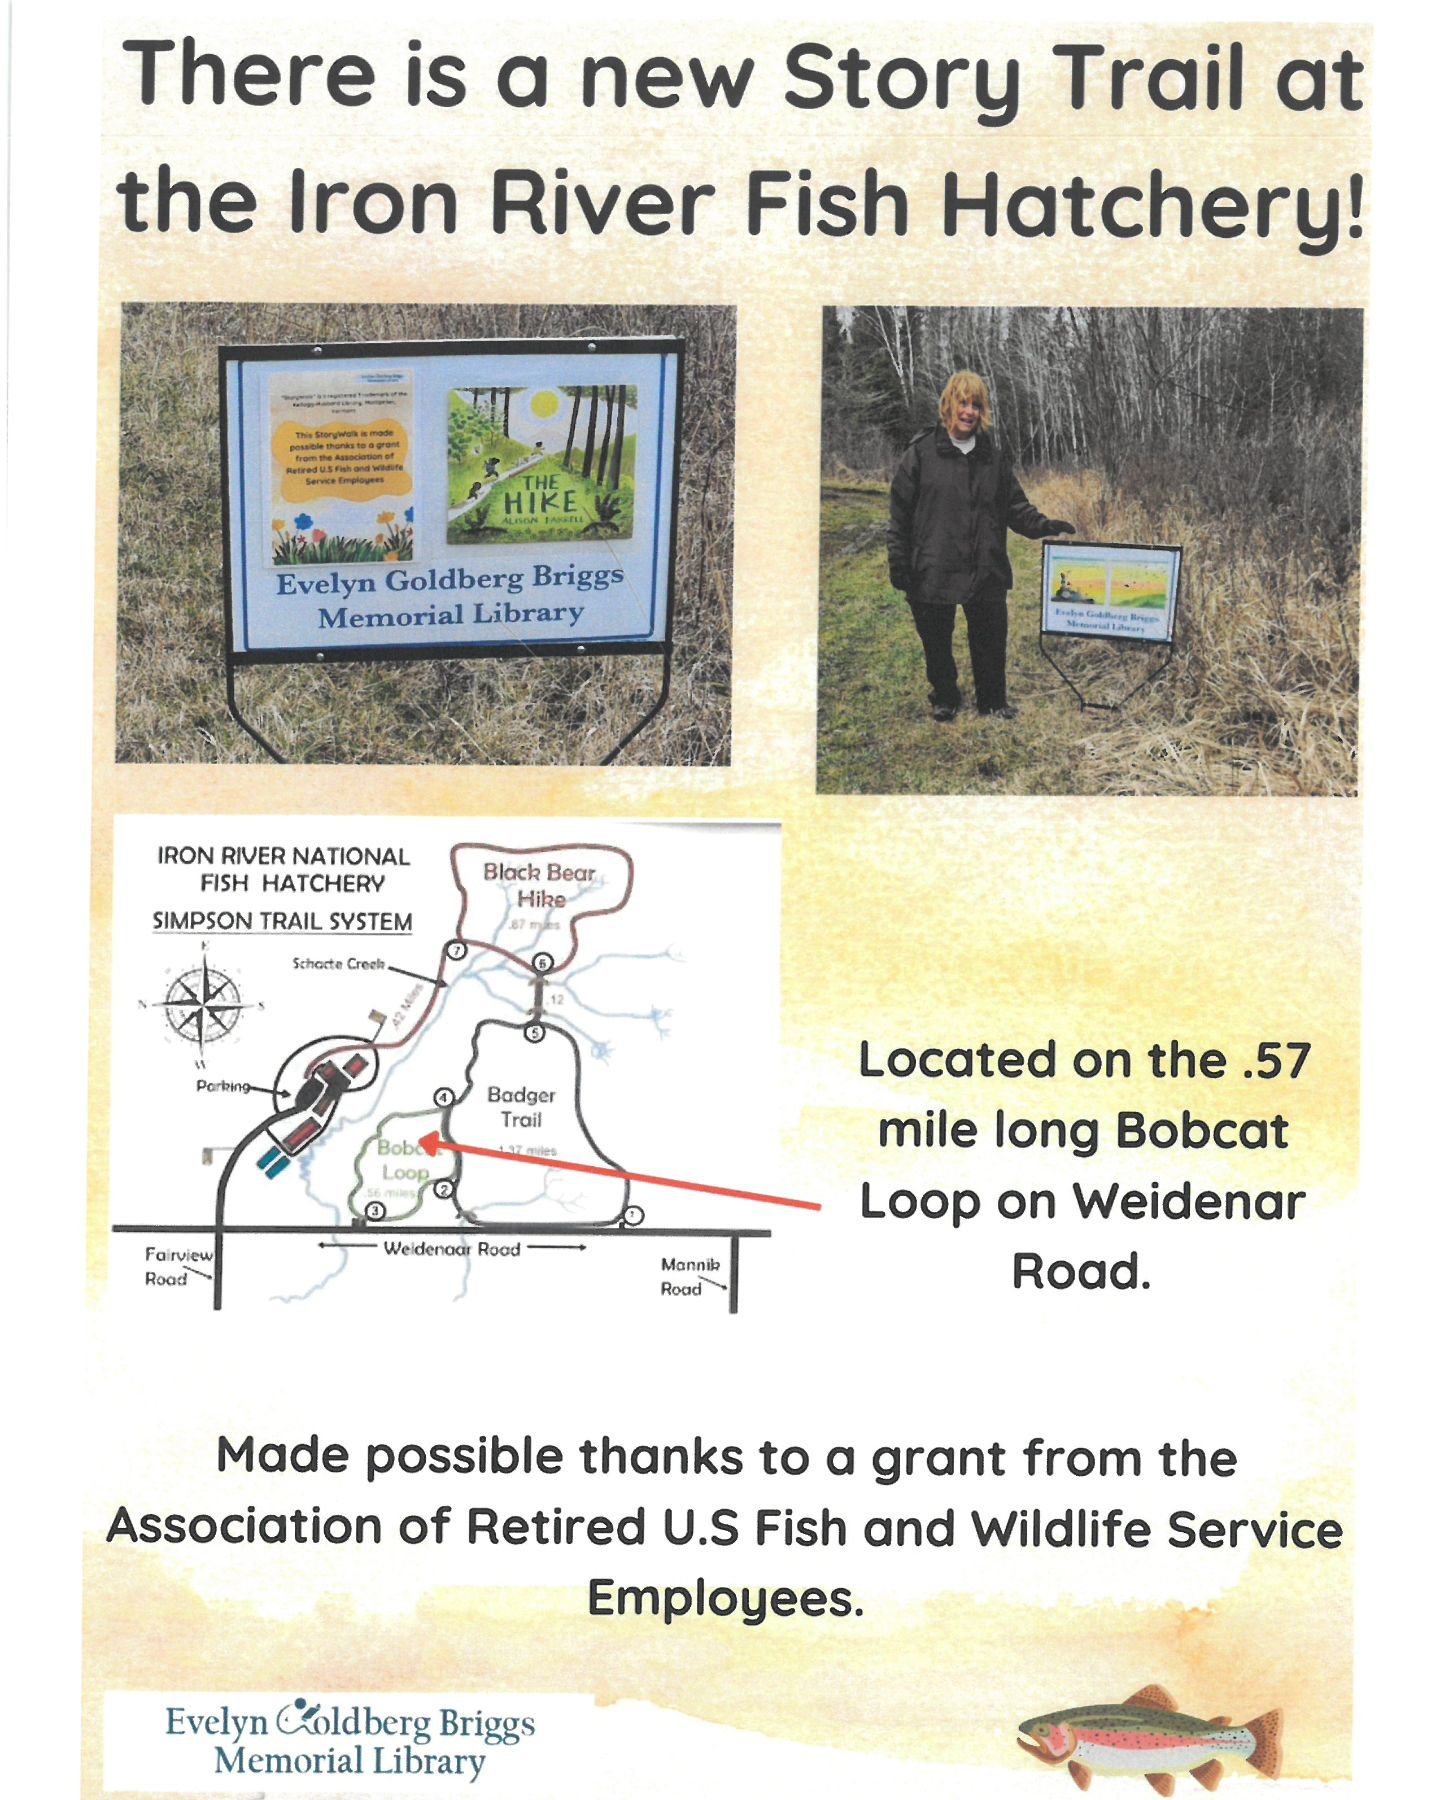 The Evelyn Goldberg Briggs Memorial Library, in conjunction with the Iron River National Fish Hatchery, received a grant from the Association of Retired U.S. Fish and Wildlife Sevice Employees to create a story trail on the Bobcat loop of the Fish Ha